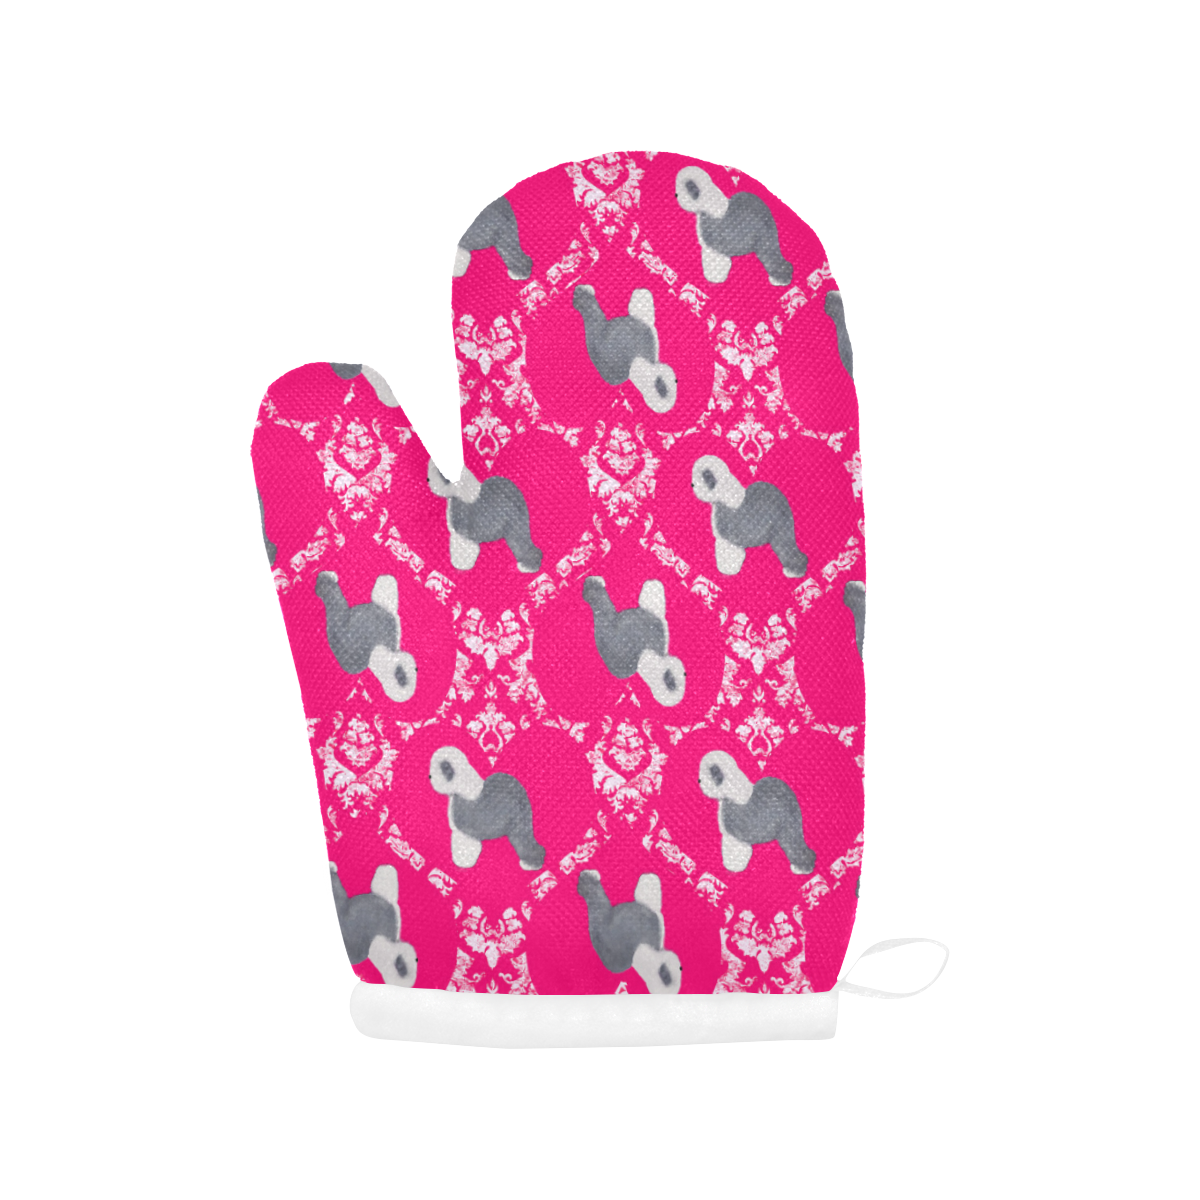 windee heart2 Oven Mitt (Two Pieces)